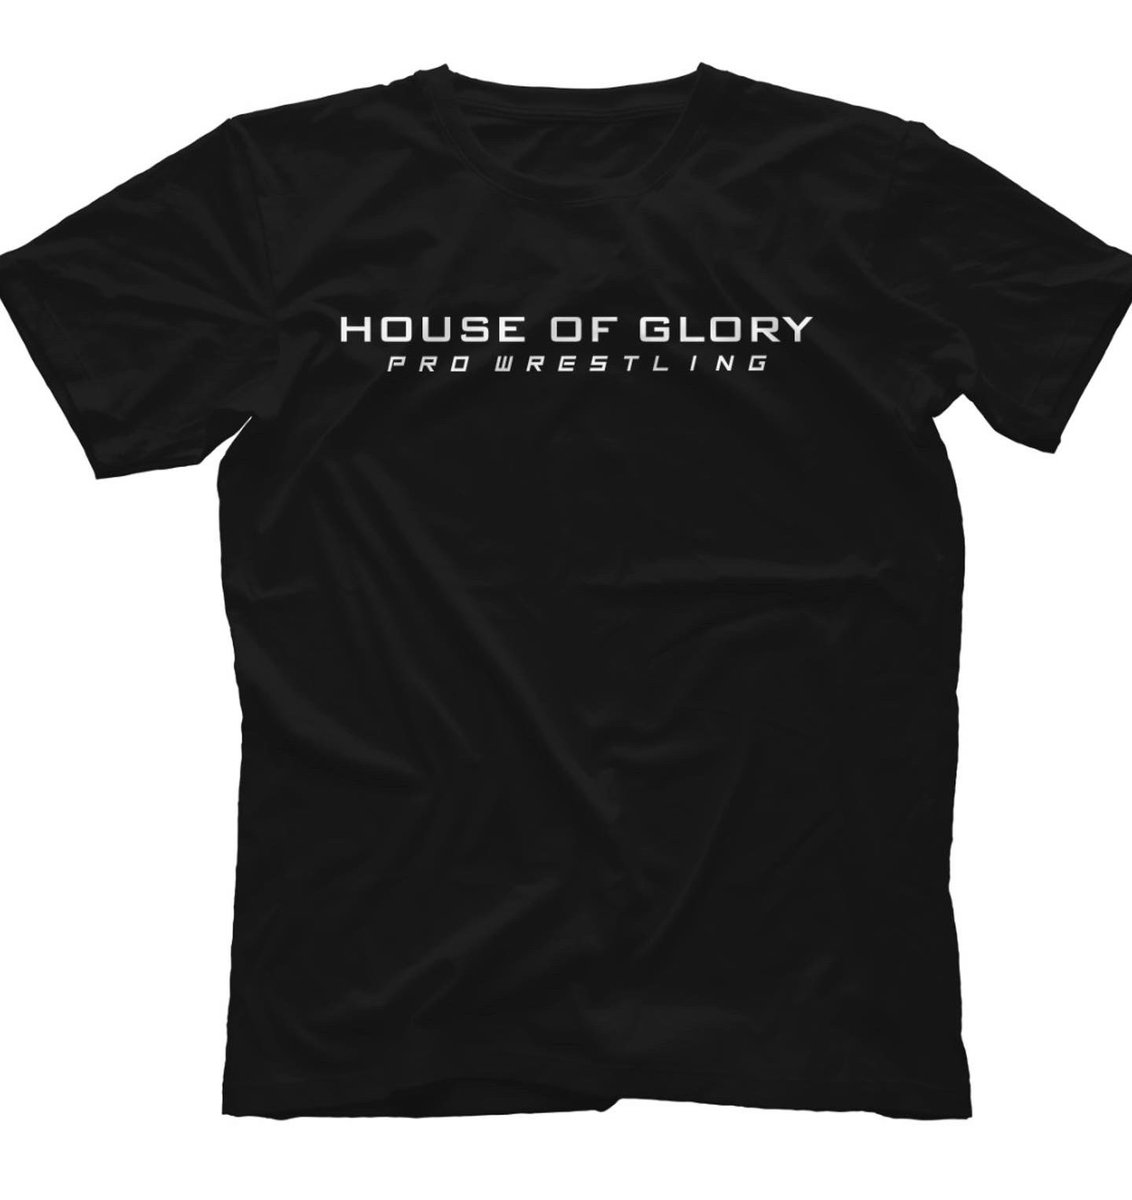 🚨Free T-Shirt Giveaway🚨 As we are on the road to #EXODUS we are giving away a tee to the best fans in the world. 1. Follow @ShopHOGNY & @HOGwrestling 2. Like and retweet this post Winner will be chosen Sunday evening. shophog.net #houseofglory #prowrestling